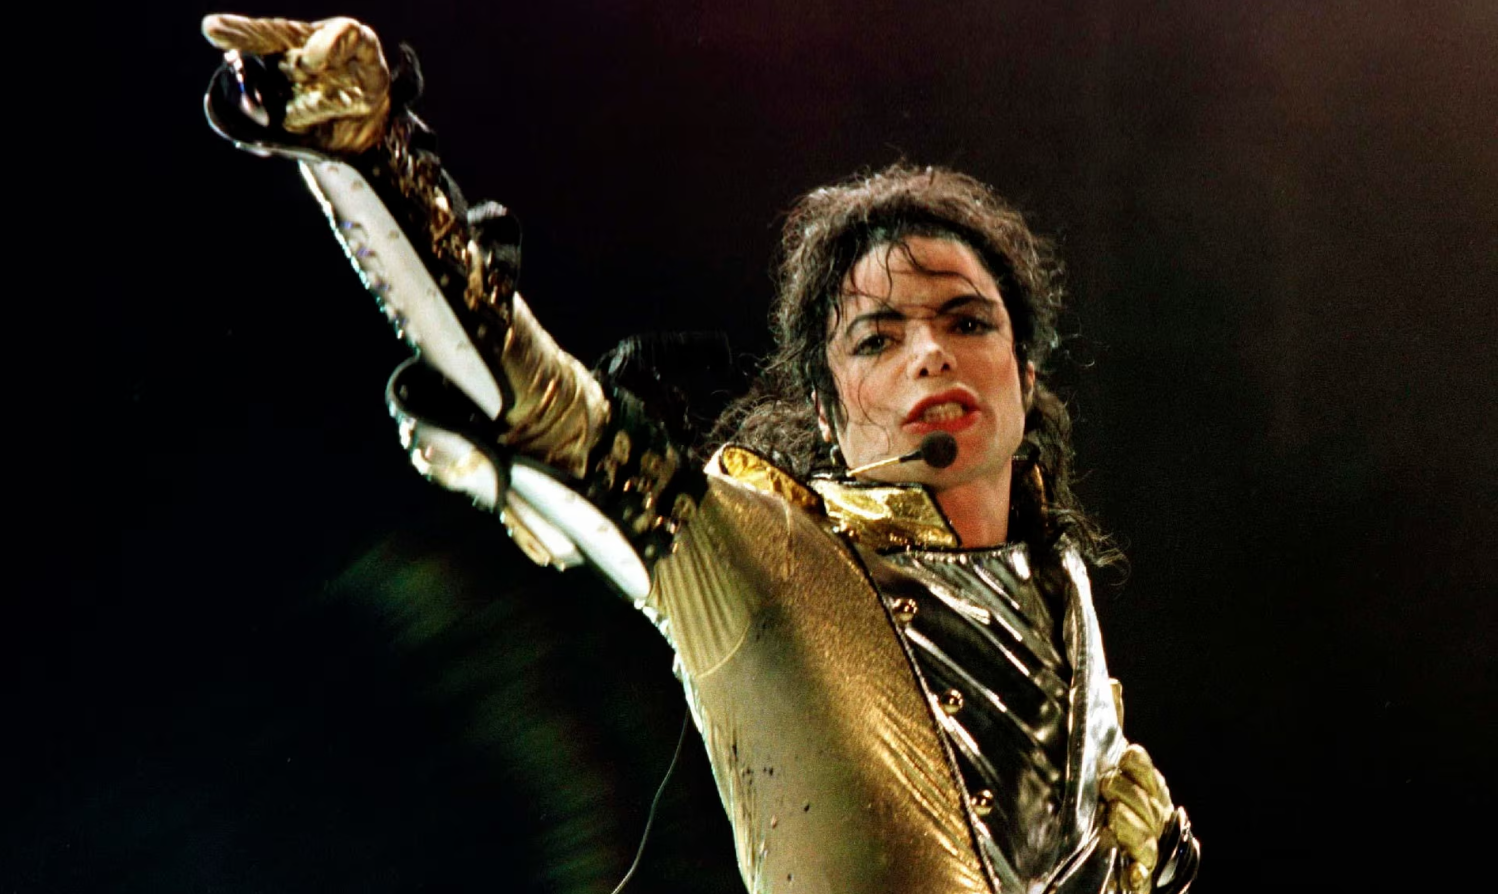 Michael Jackson was more than $500m in debt when he died in 2009